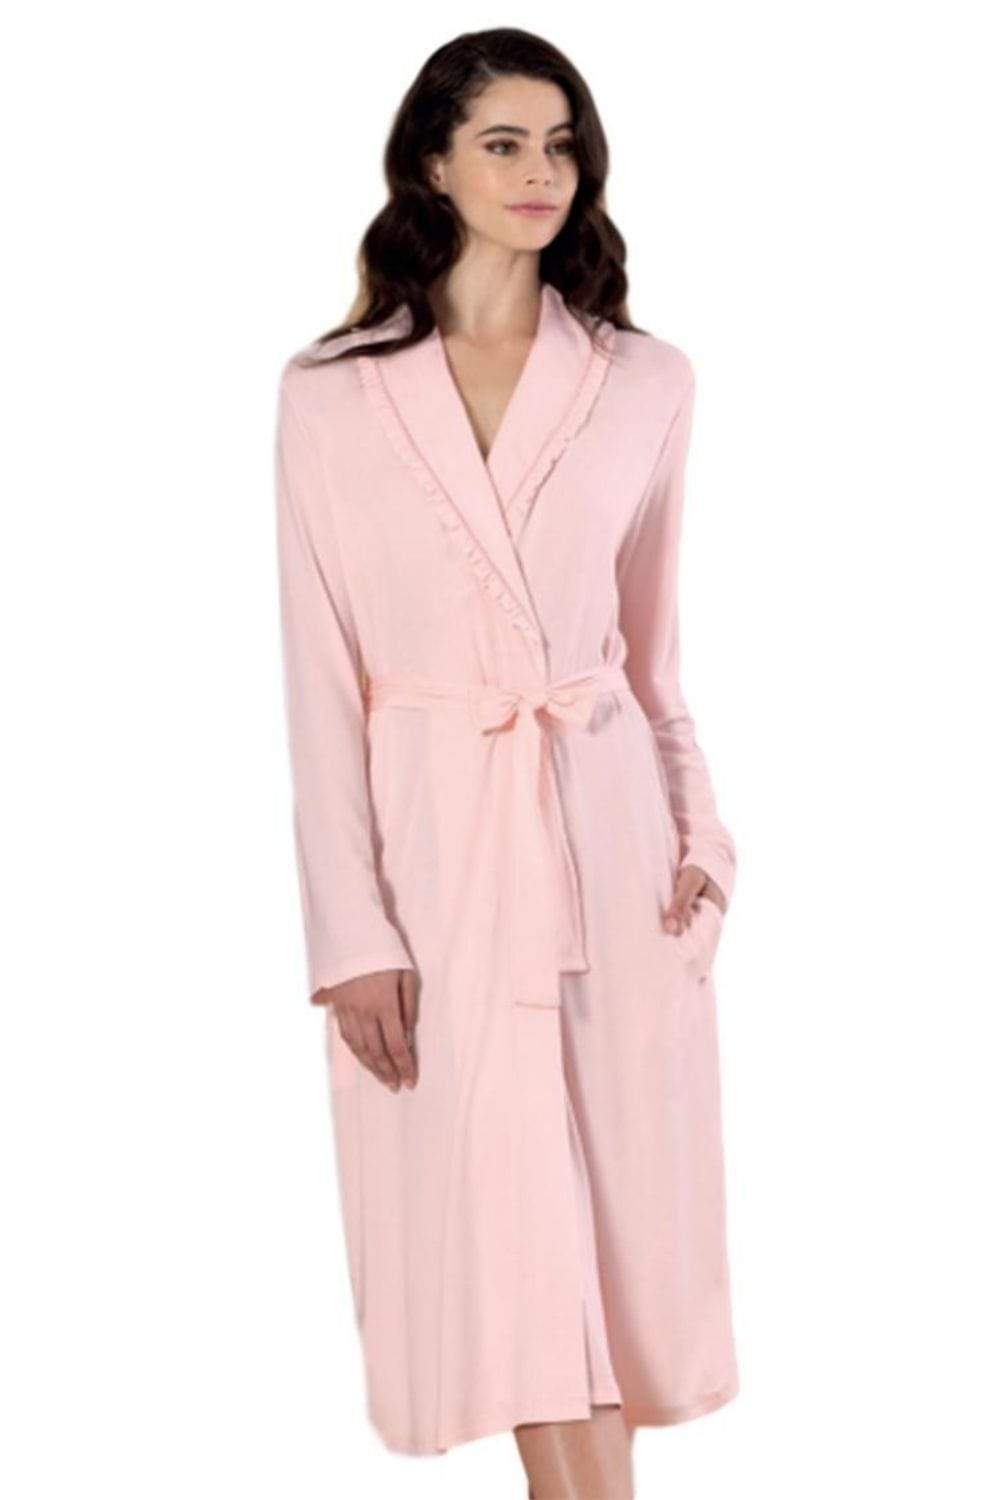 Linclalor Dressing Gown Italian Jersey Frilled Wrap - Pink or Blue - 10 to 26